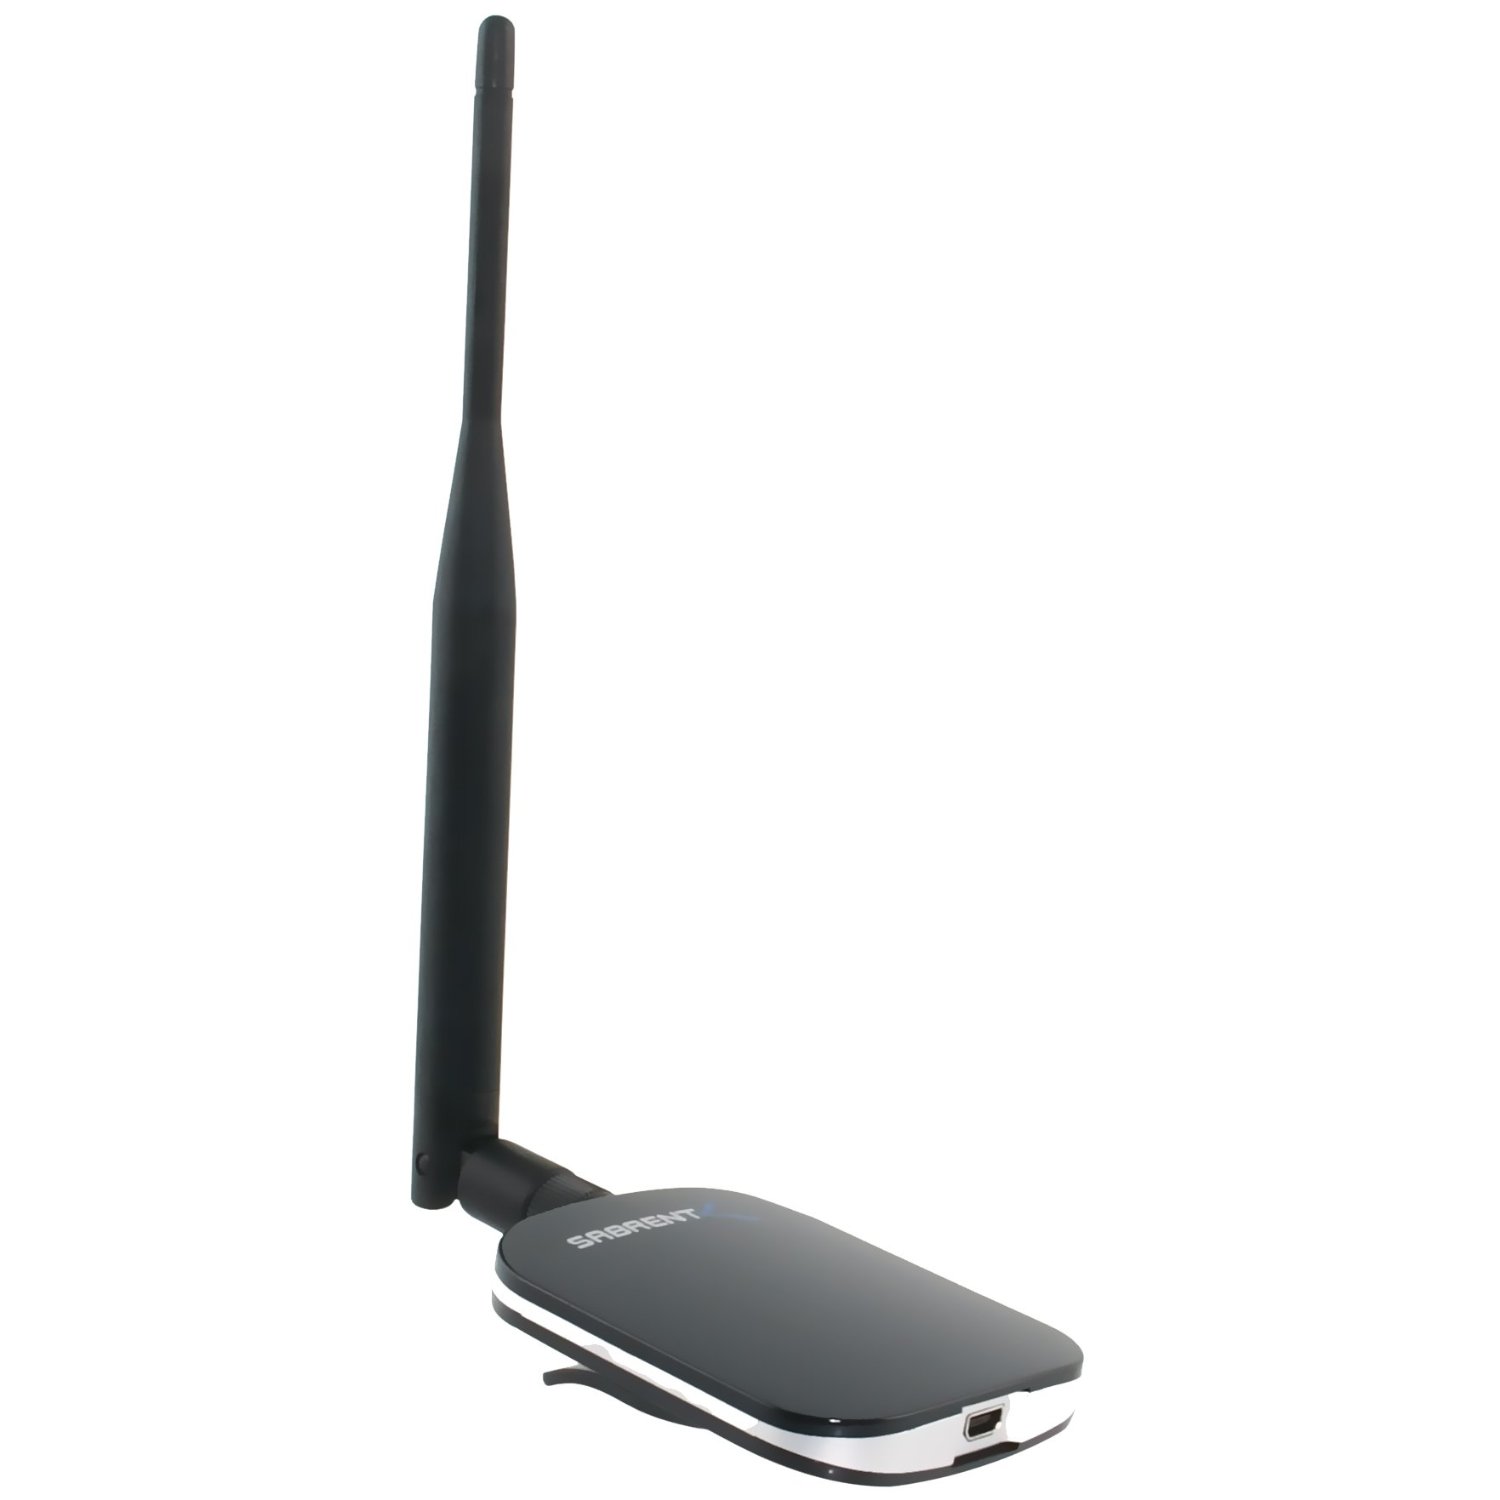 Sabrent High Power USB Wireless Wi-Fi Network Adapter with 6 dBi Antennas - 802.11 B/G/N 300Mbps (NT-H802N)